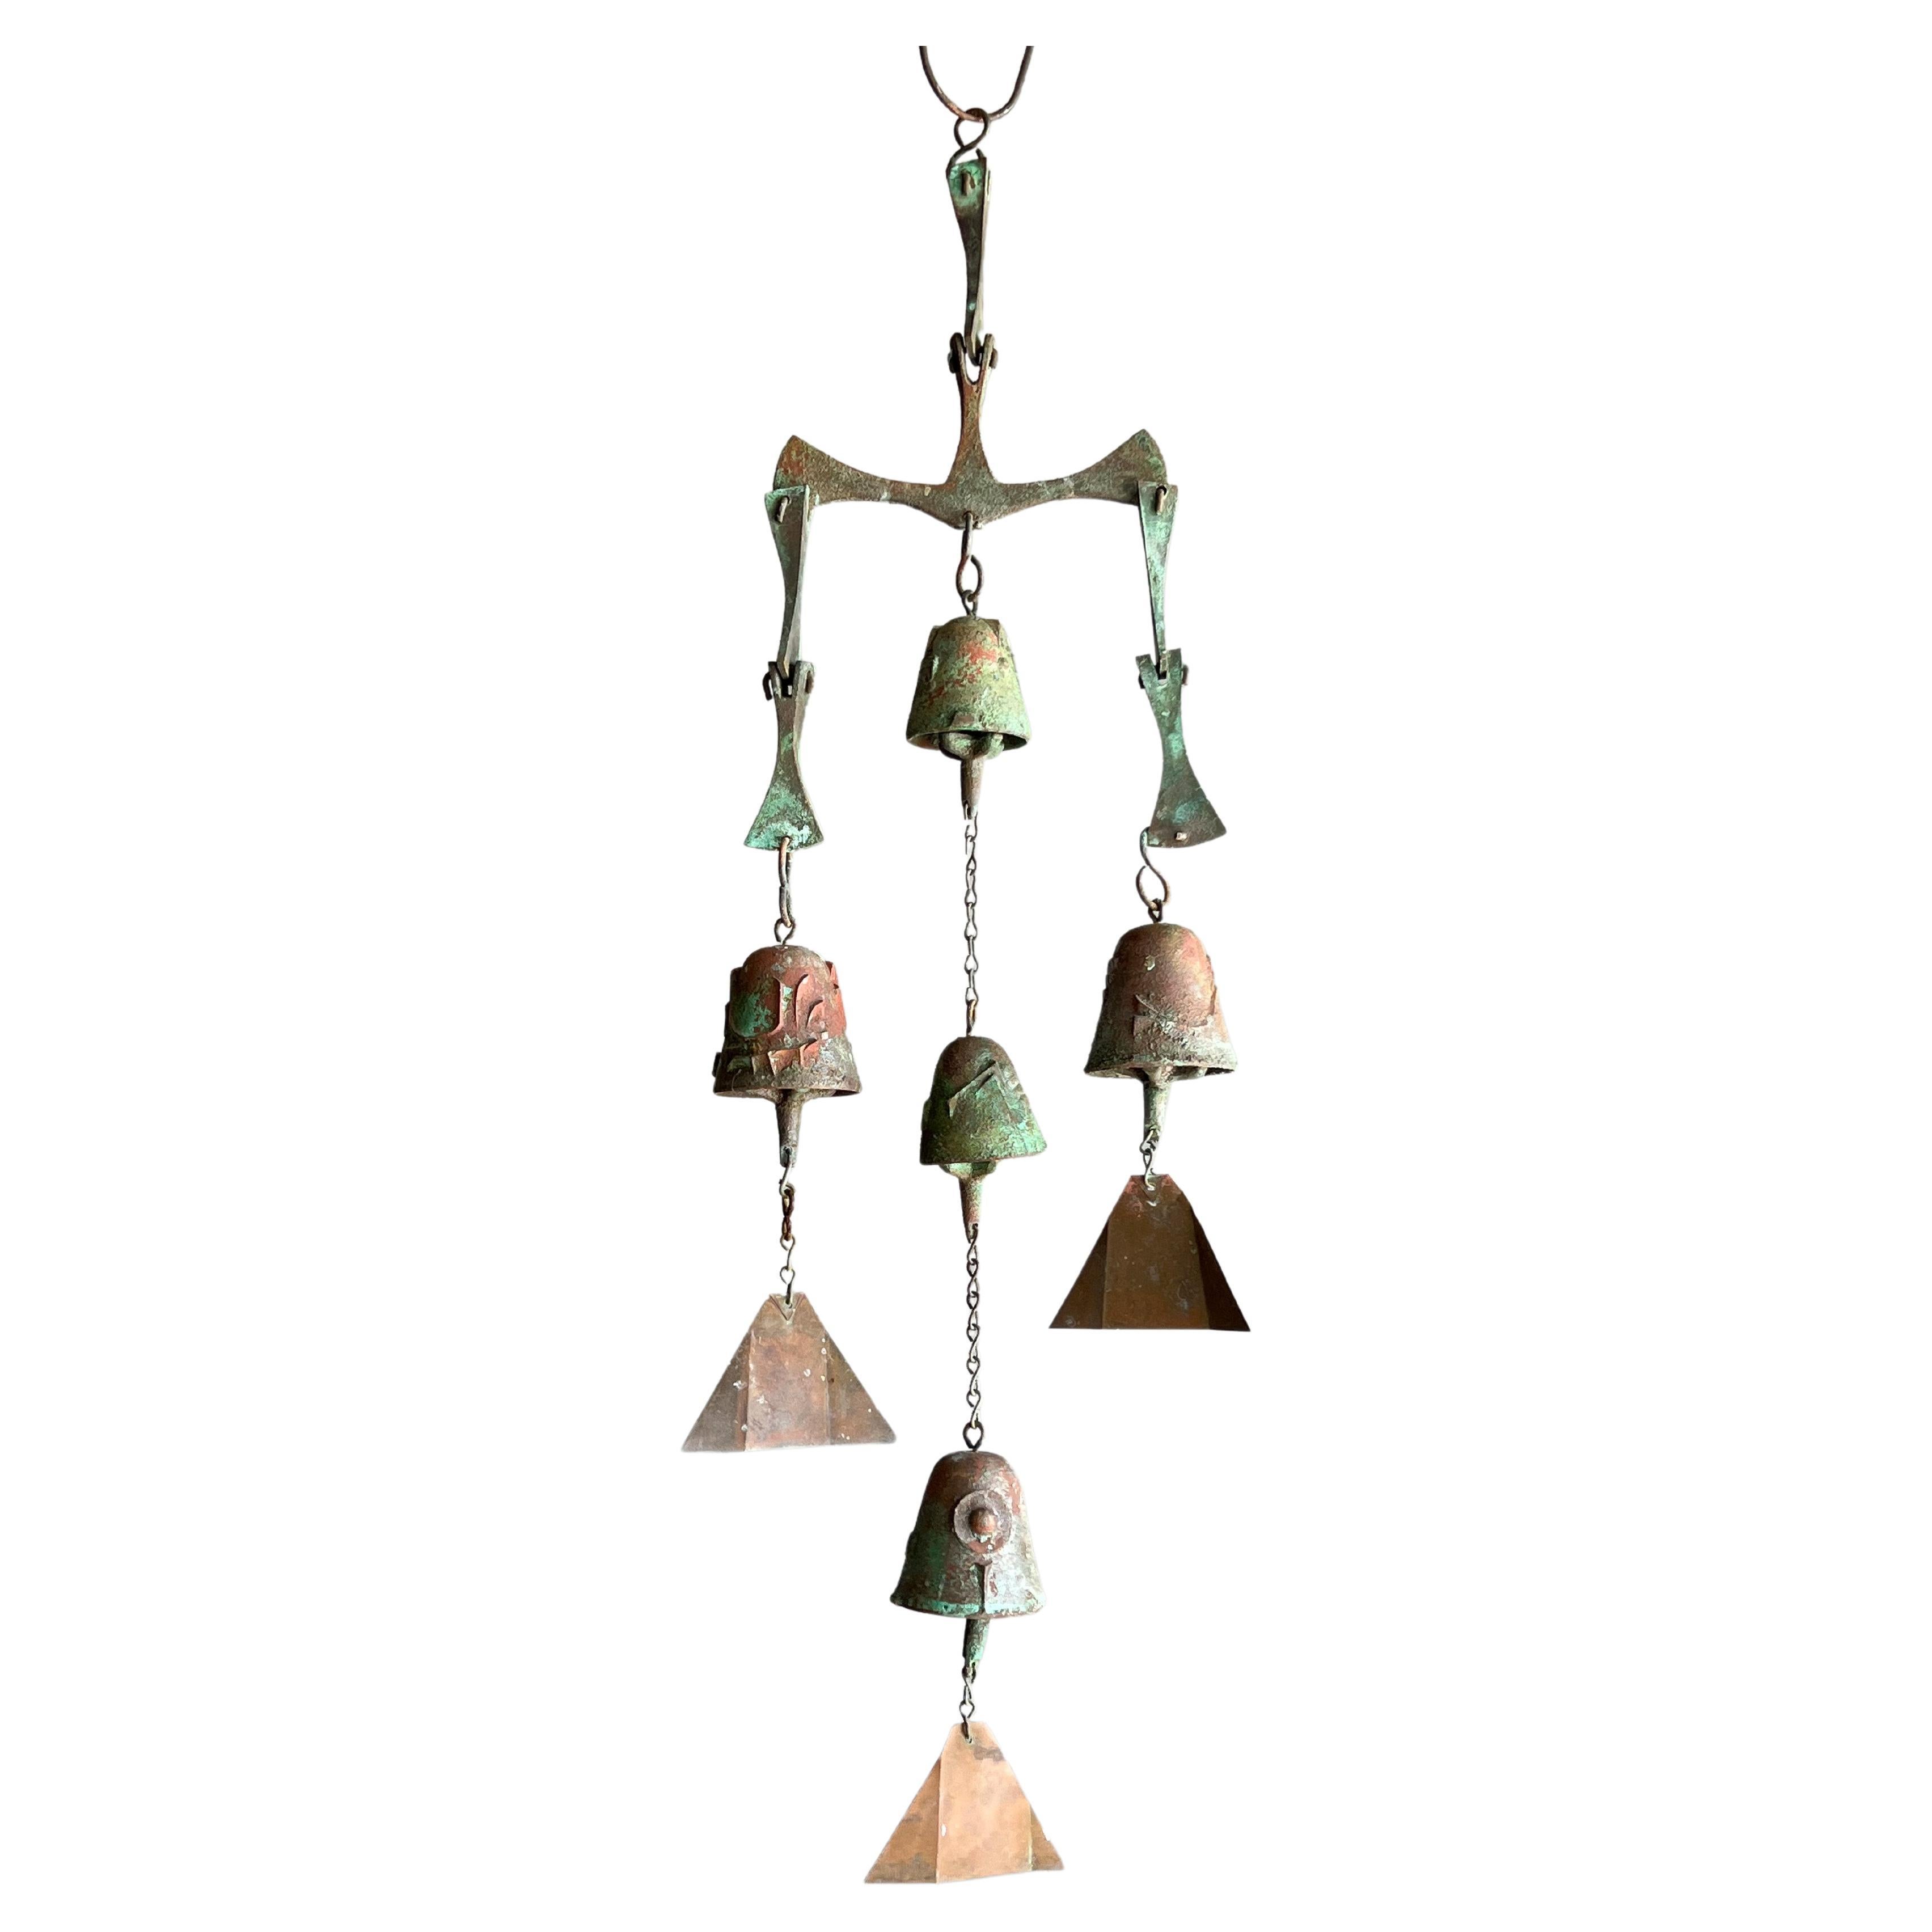 Early Mid-Century Bronze Wind Chime Bell by Poalo Soleri for Arcosanti 1970s